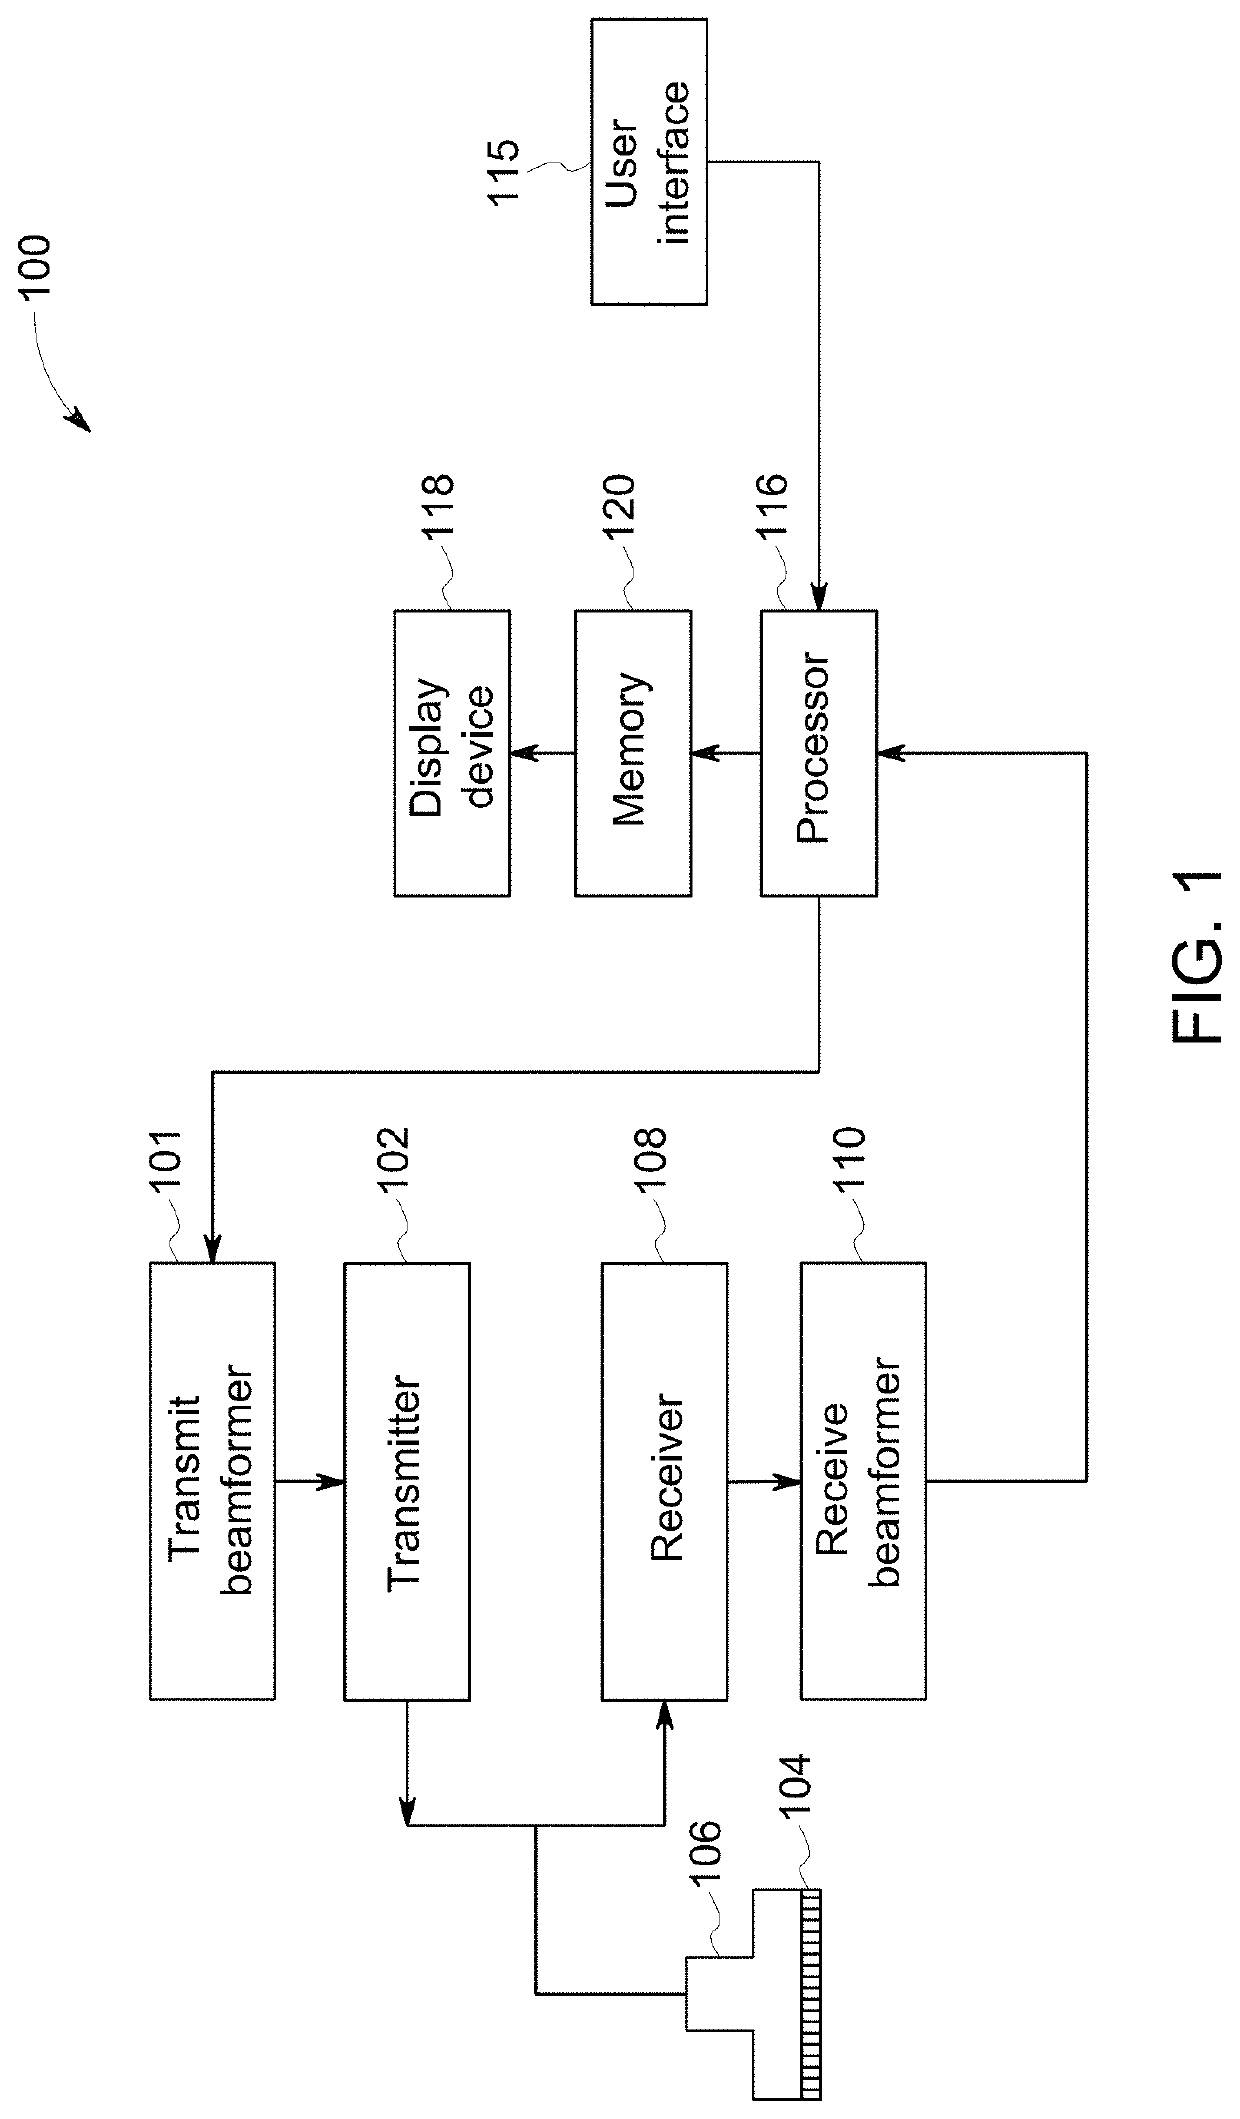 Imaging system and method providing scalable resolution in multi-dimensional image data